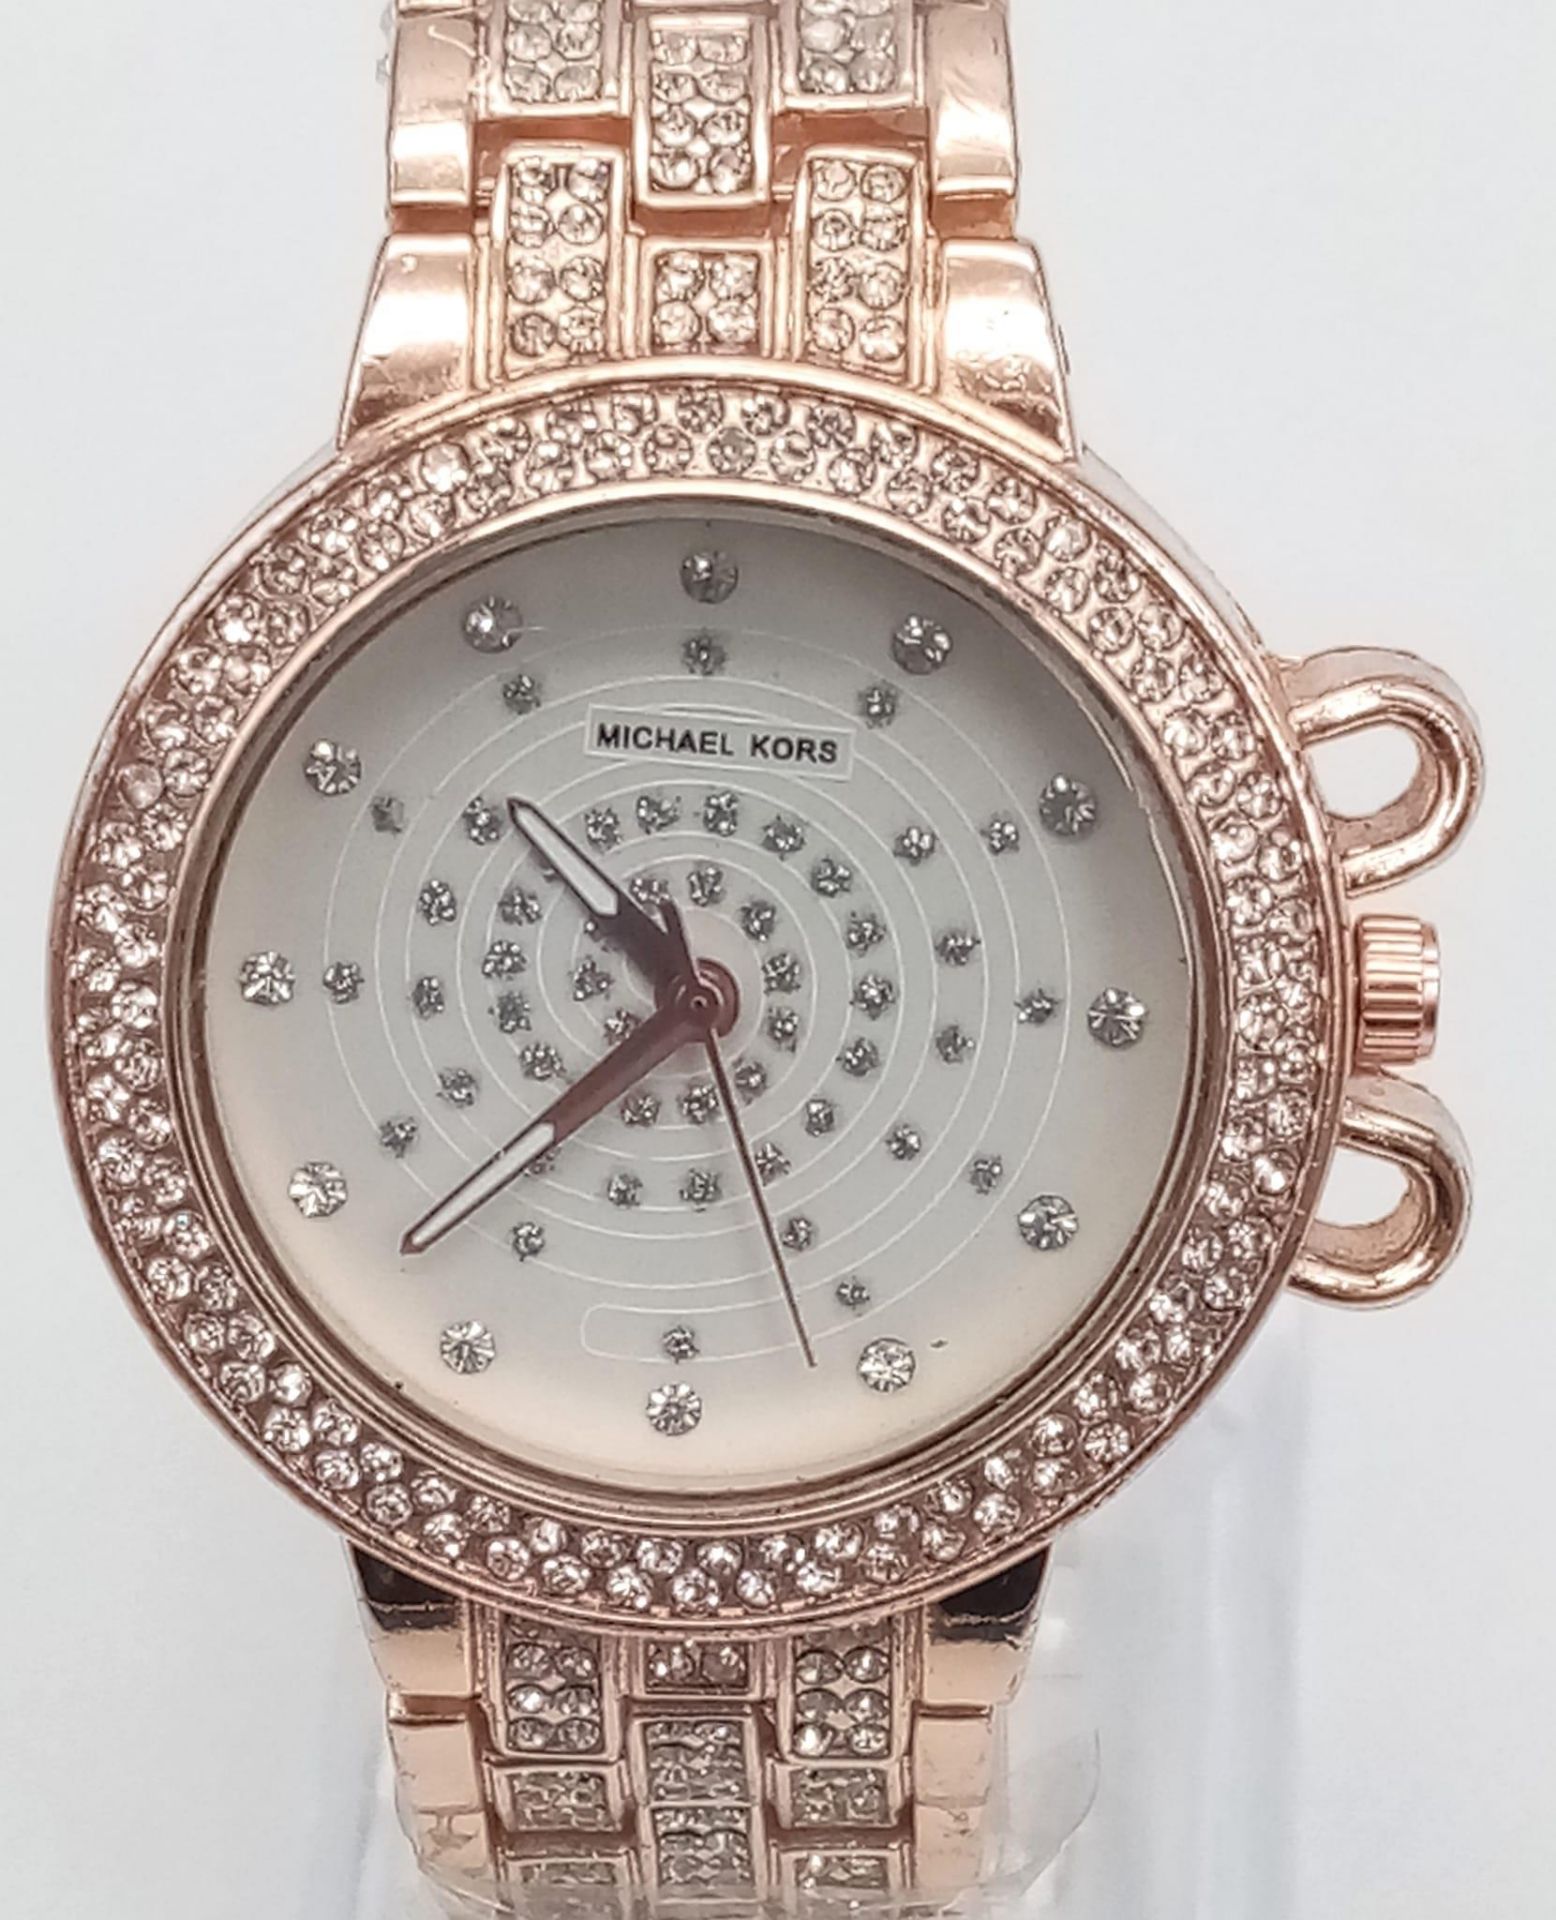 A LADIES MICHAEL KORS FACSIMILE WATCH IN ROSE GOLD TONE STONE SET BEZEL AND STRAP, FULL WORKING